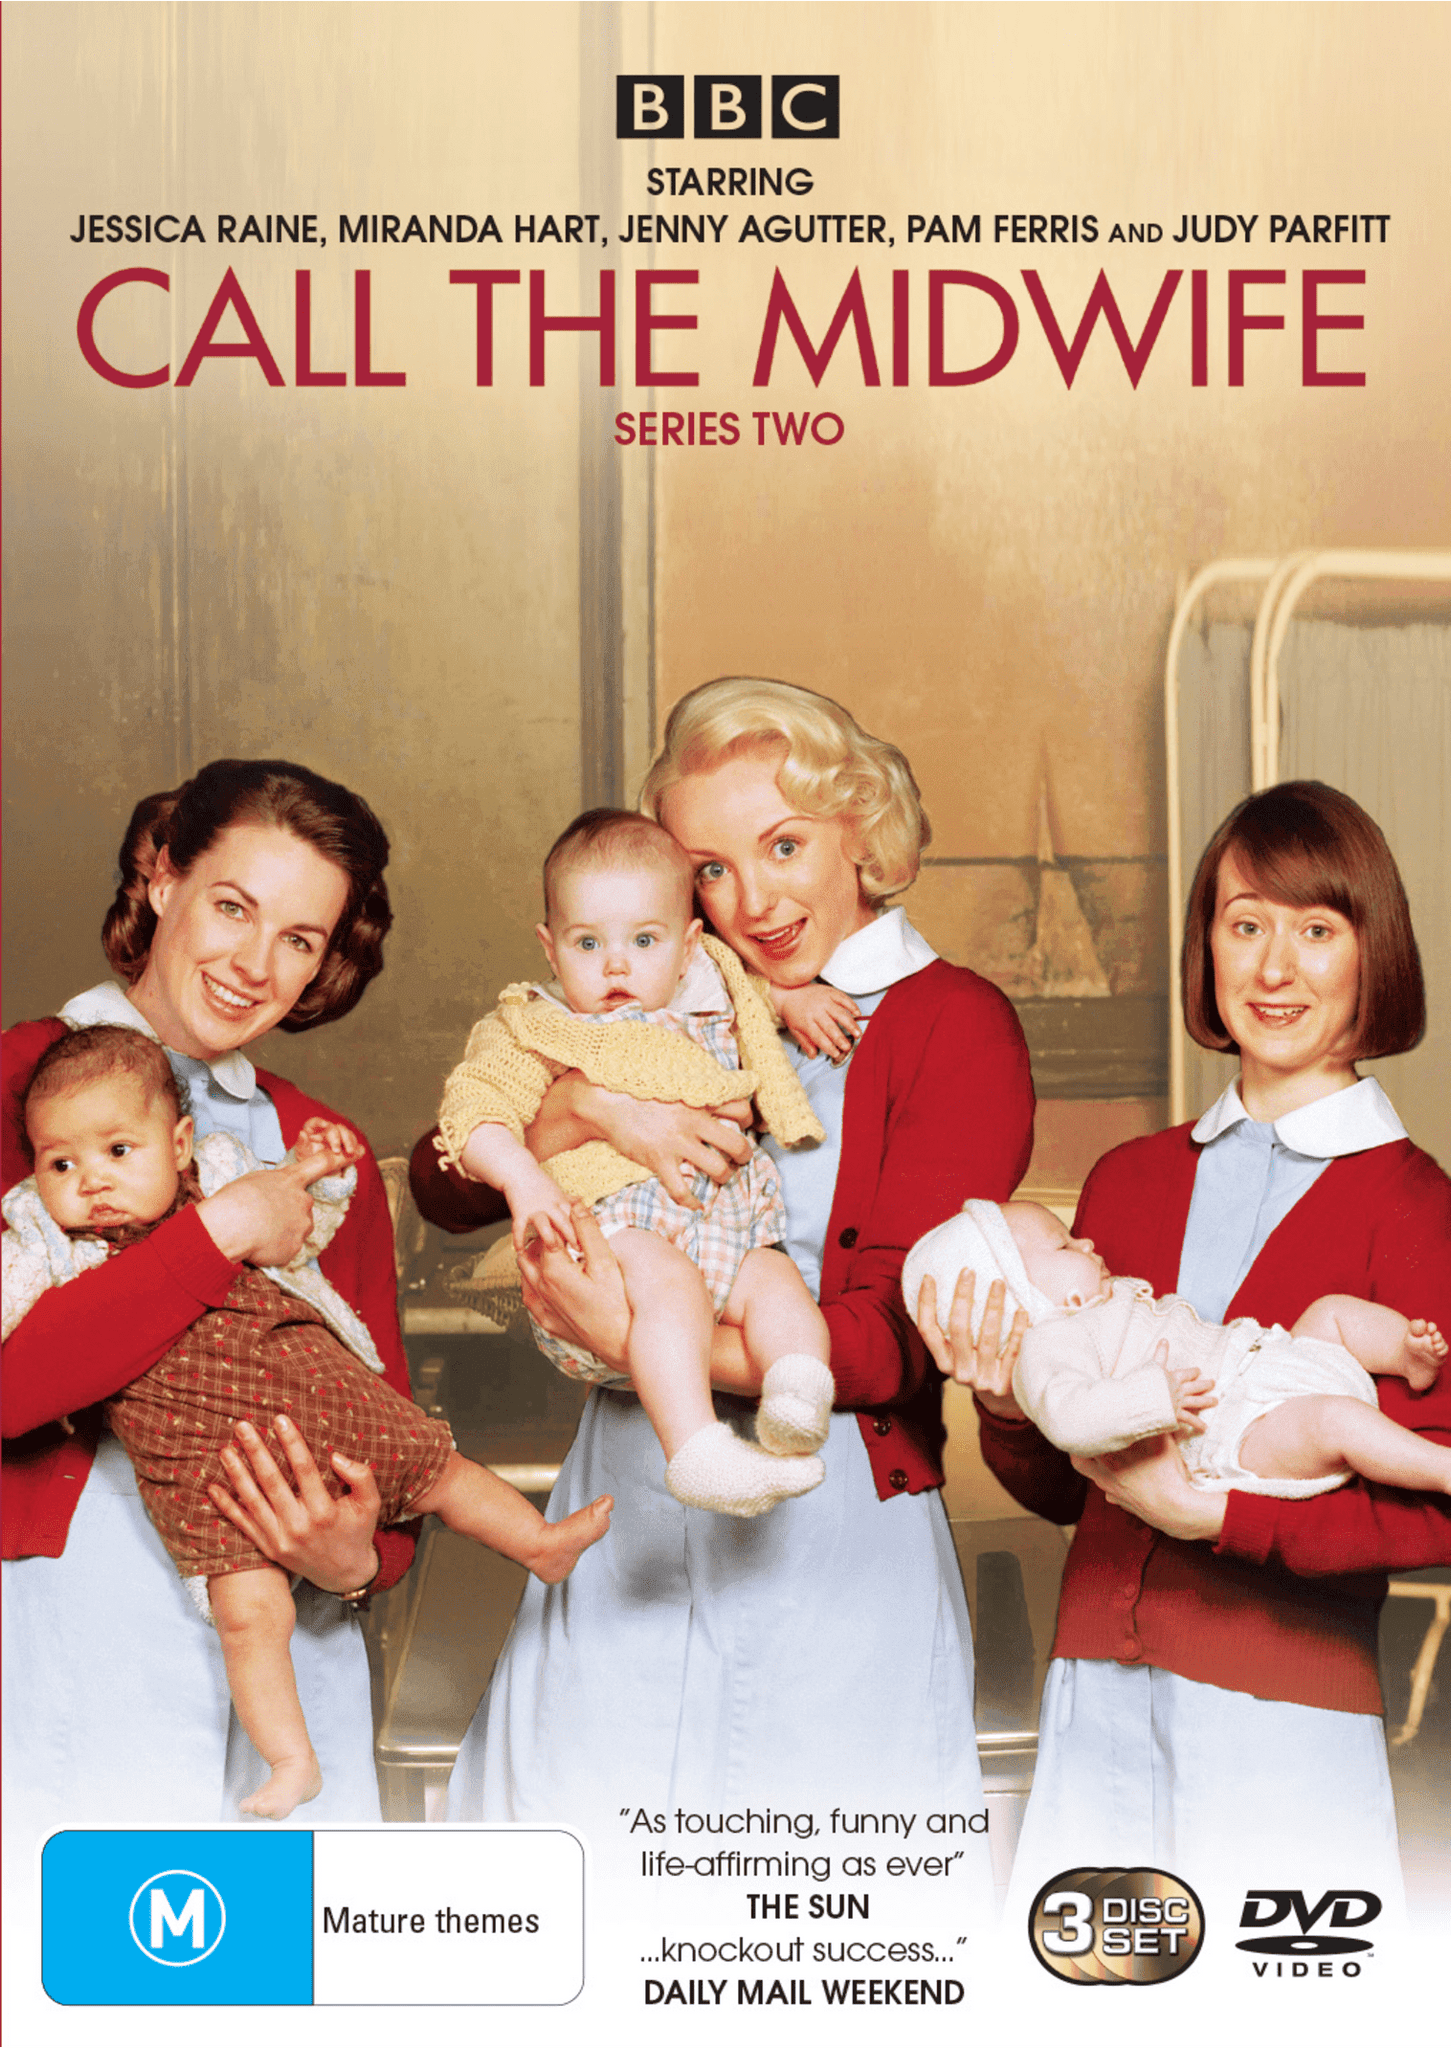 CALL THE MIDWIFE: SERIES 2